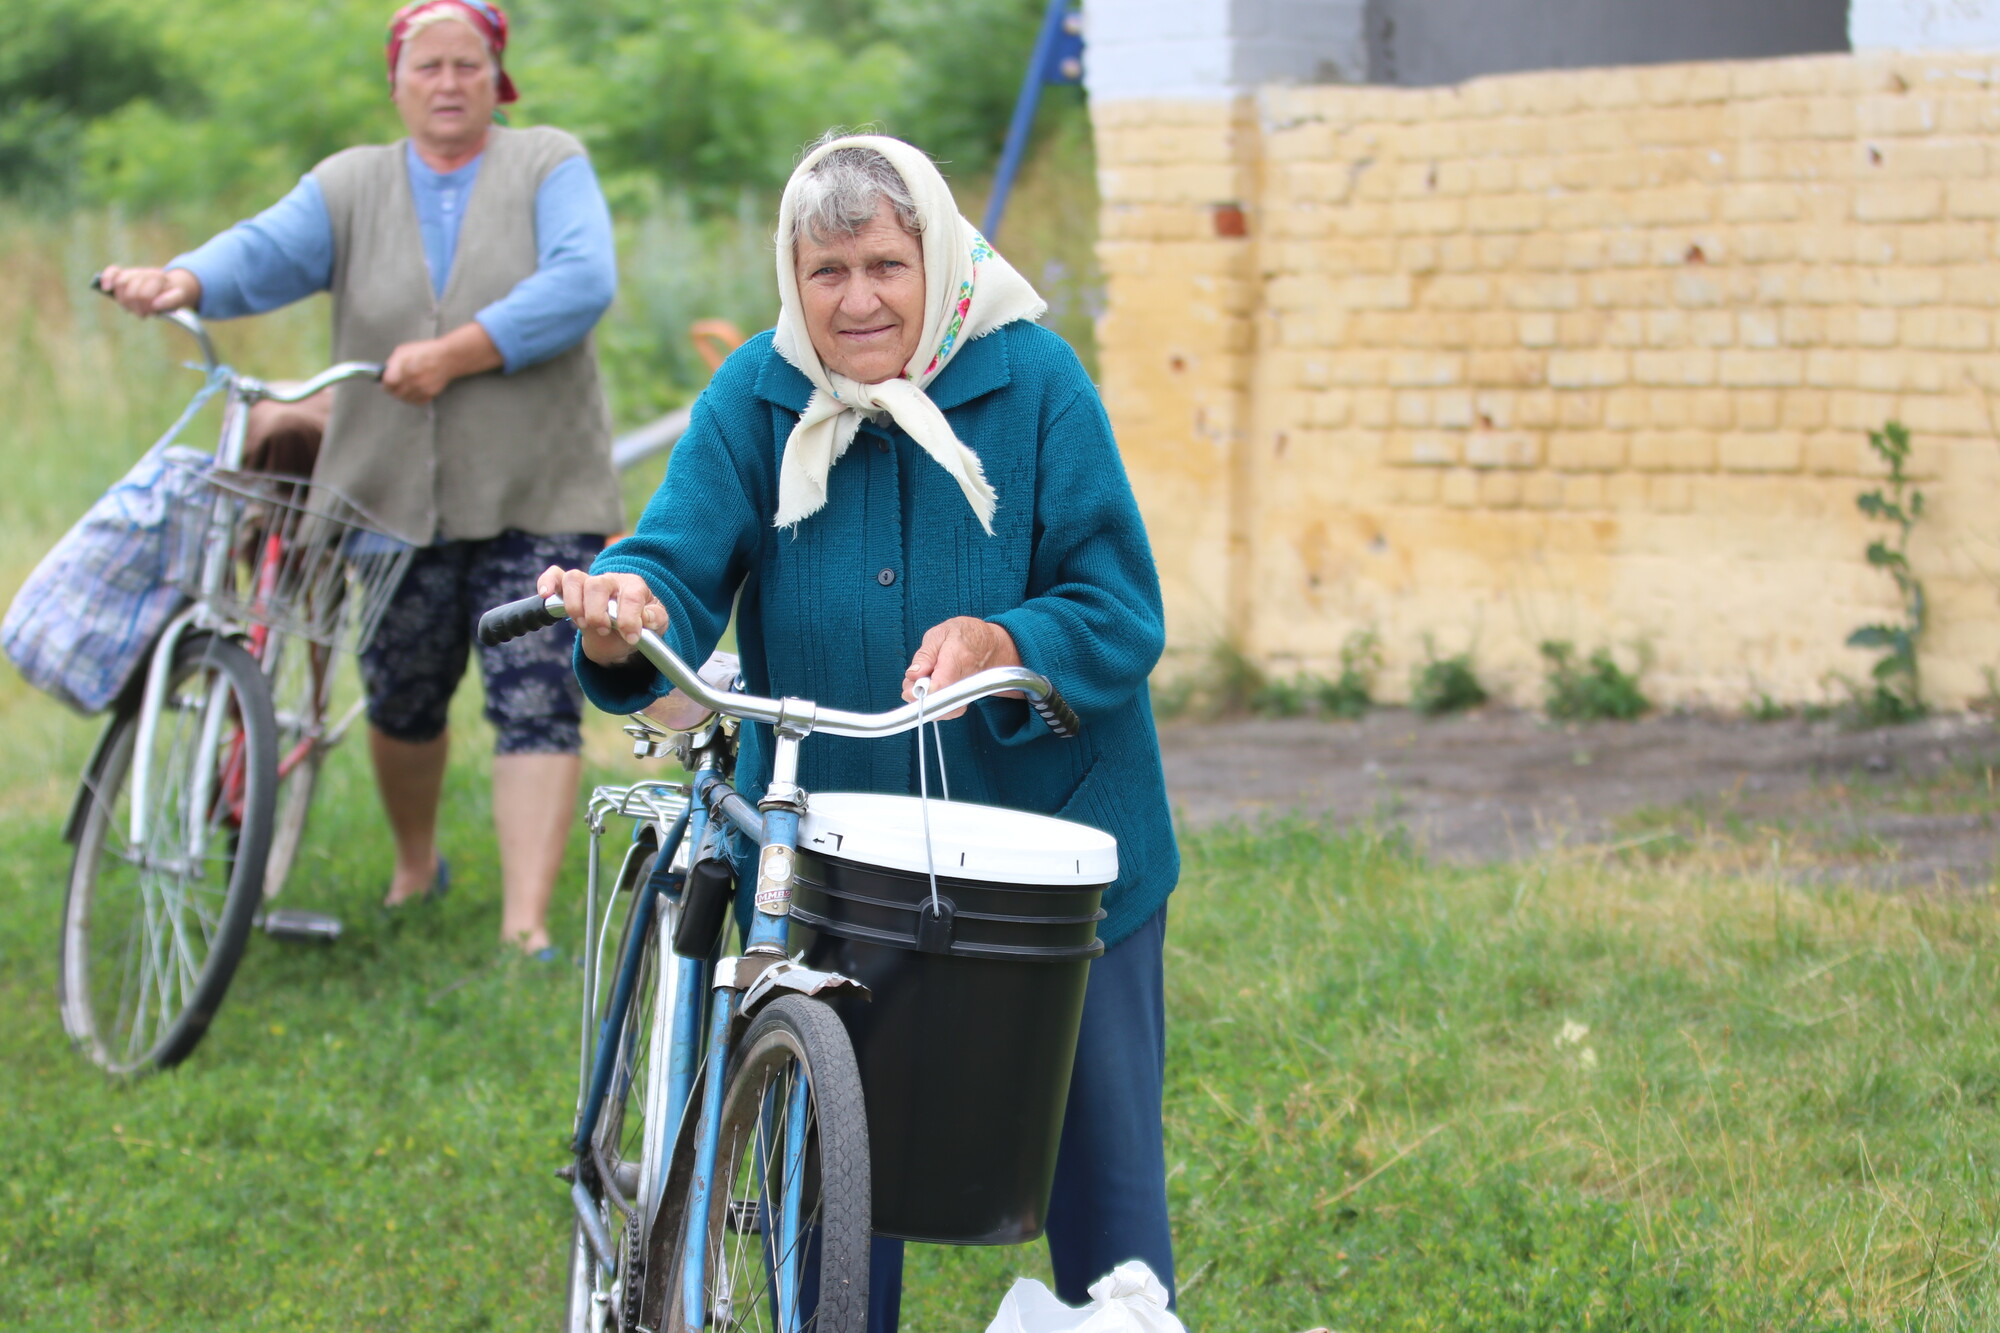 A woman holding a bike and relief bucket